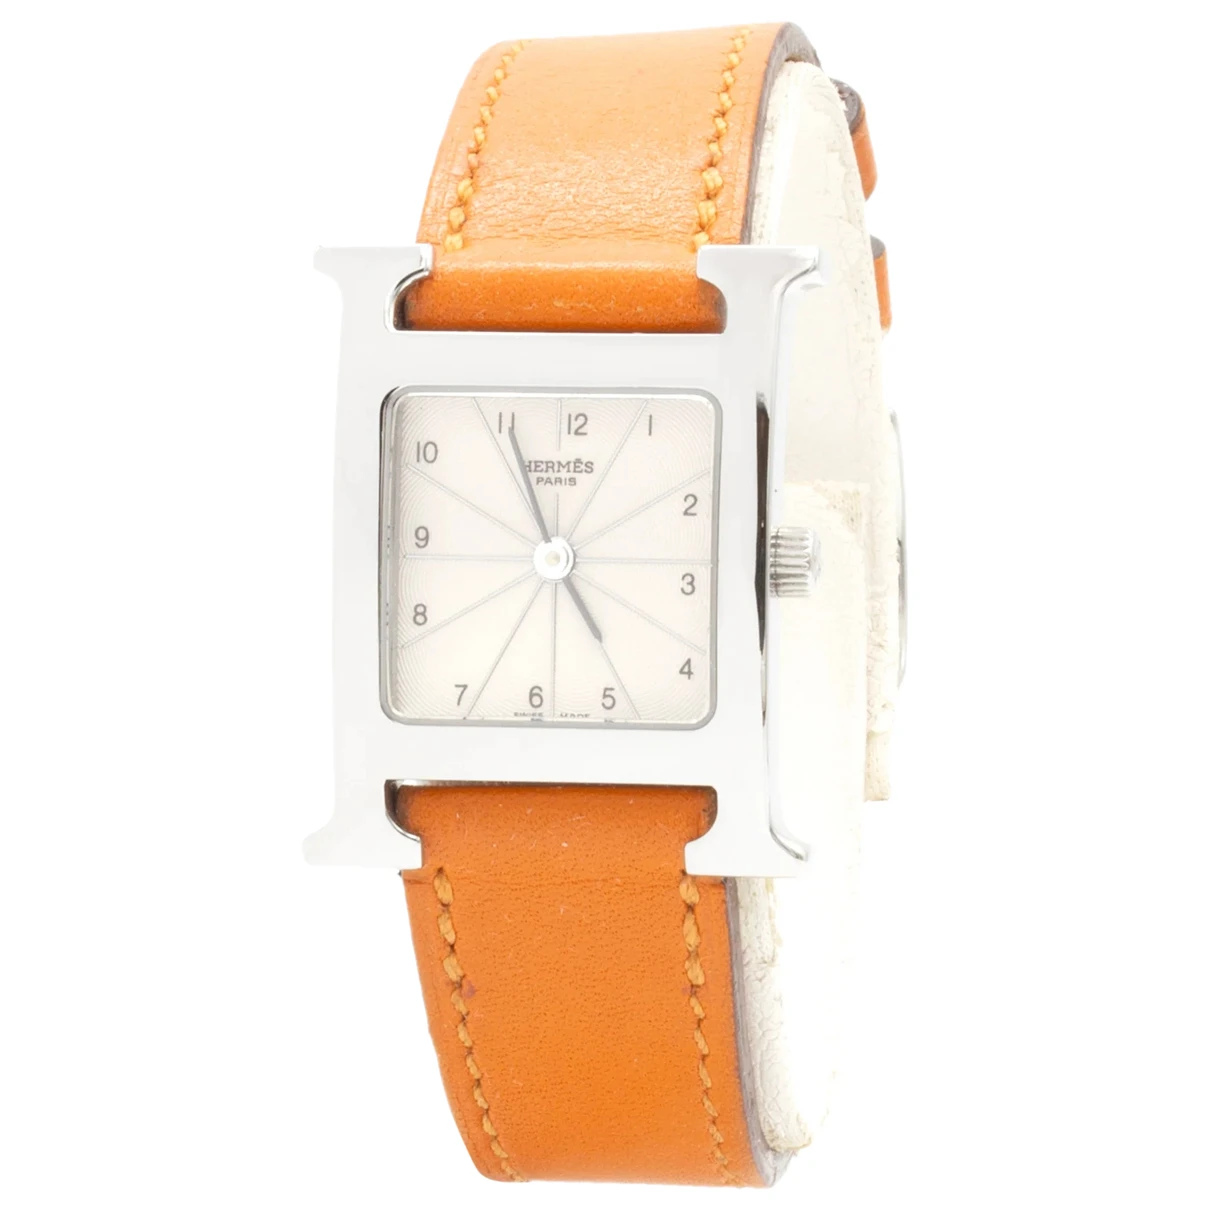 accessories Hermès watches Heure H for Female Steel. Used condition